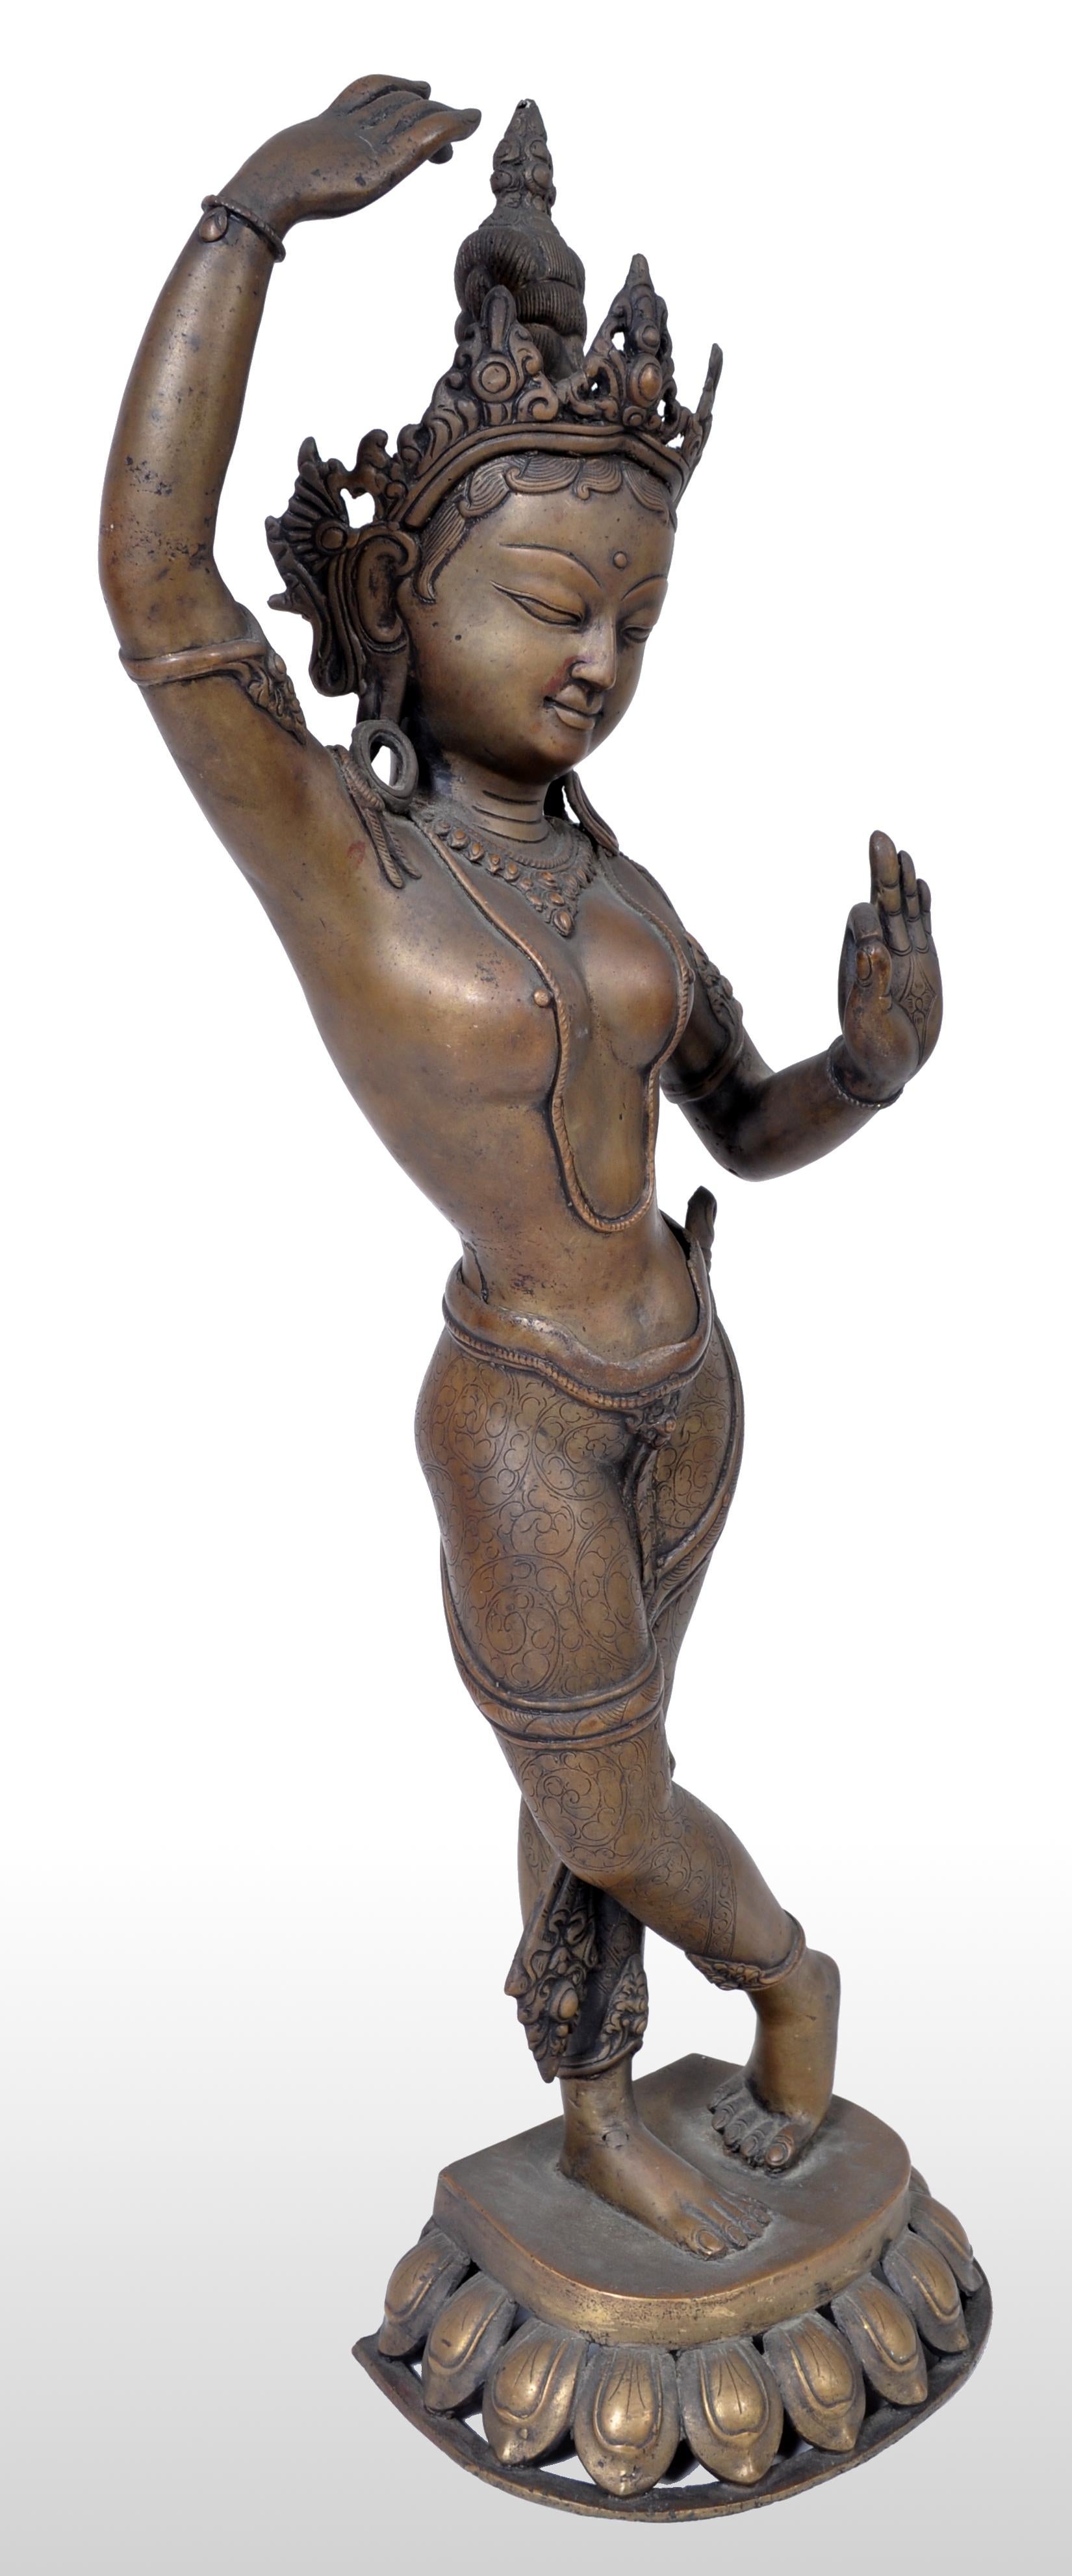 Antique early 19th century Indian bronze figure of Lakshmi, circa 1800. This bronze figure of large size depicting Lakshmi wearing an ornate headdress and striking a dancing pose. The figure raised on a lotus base.